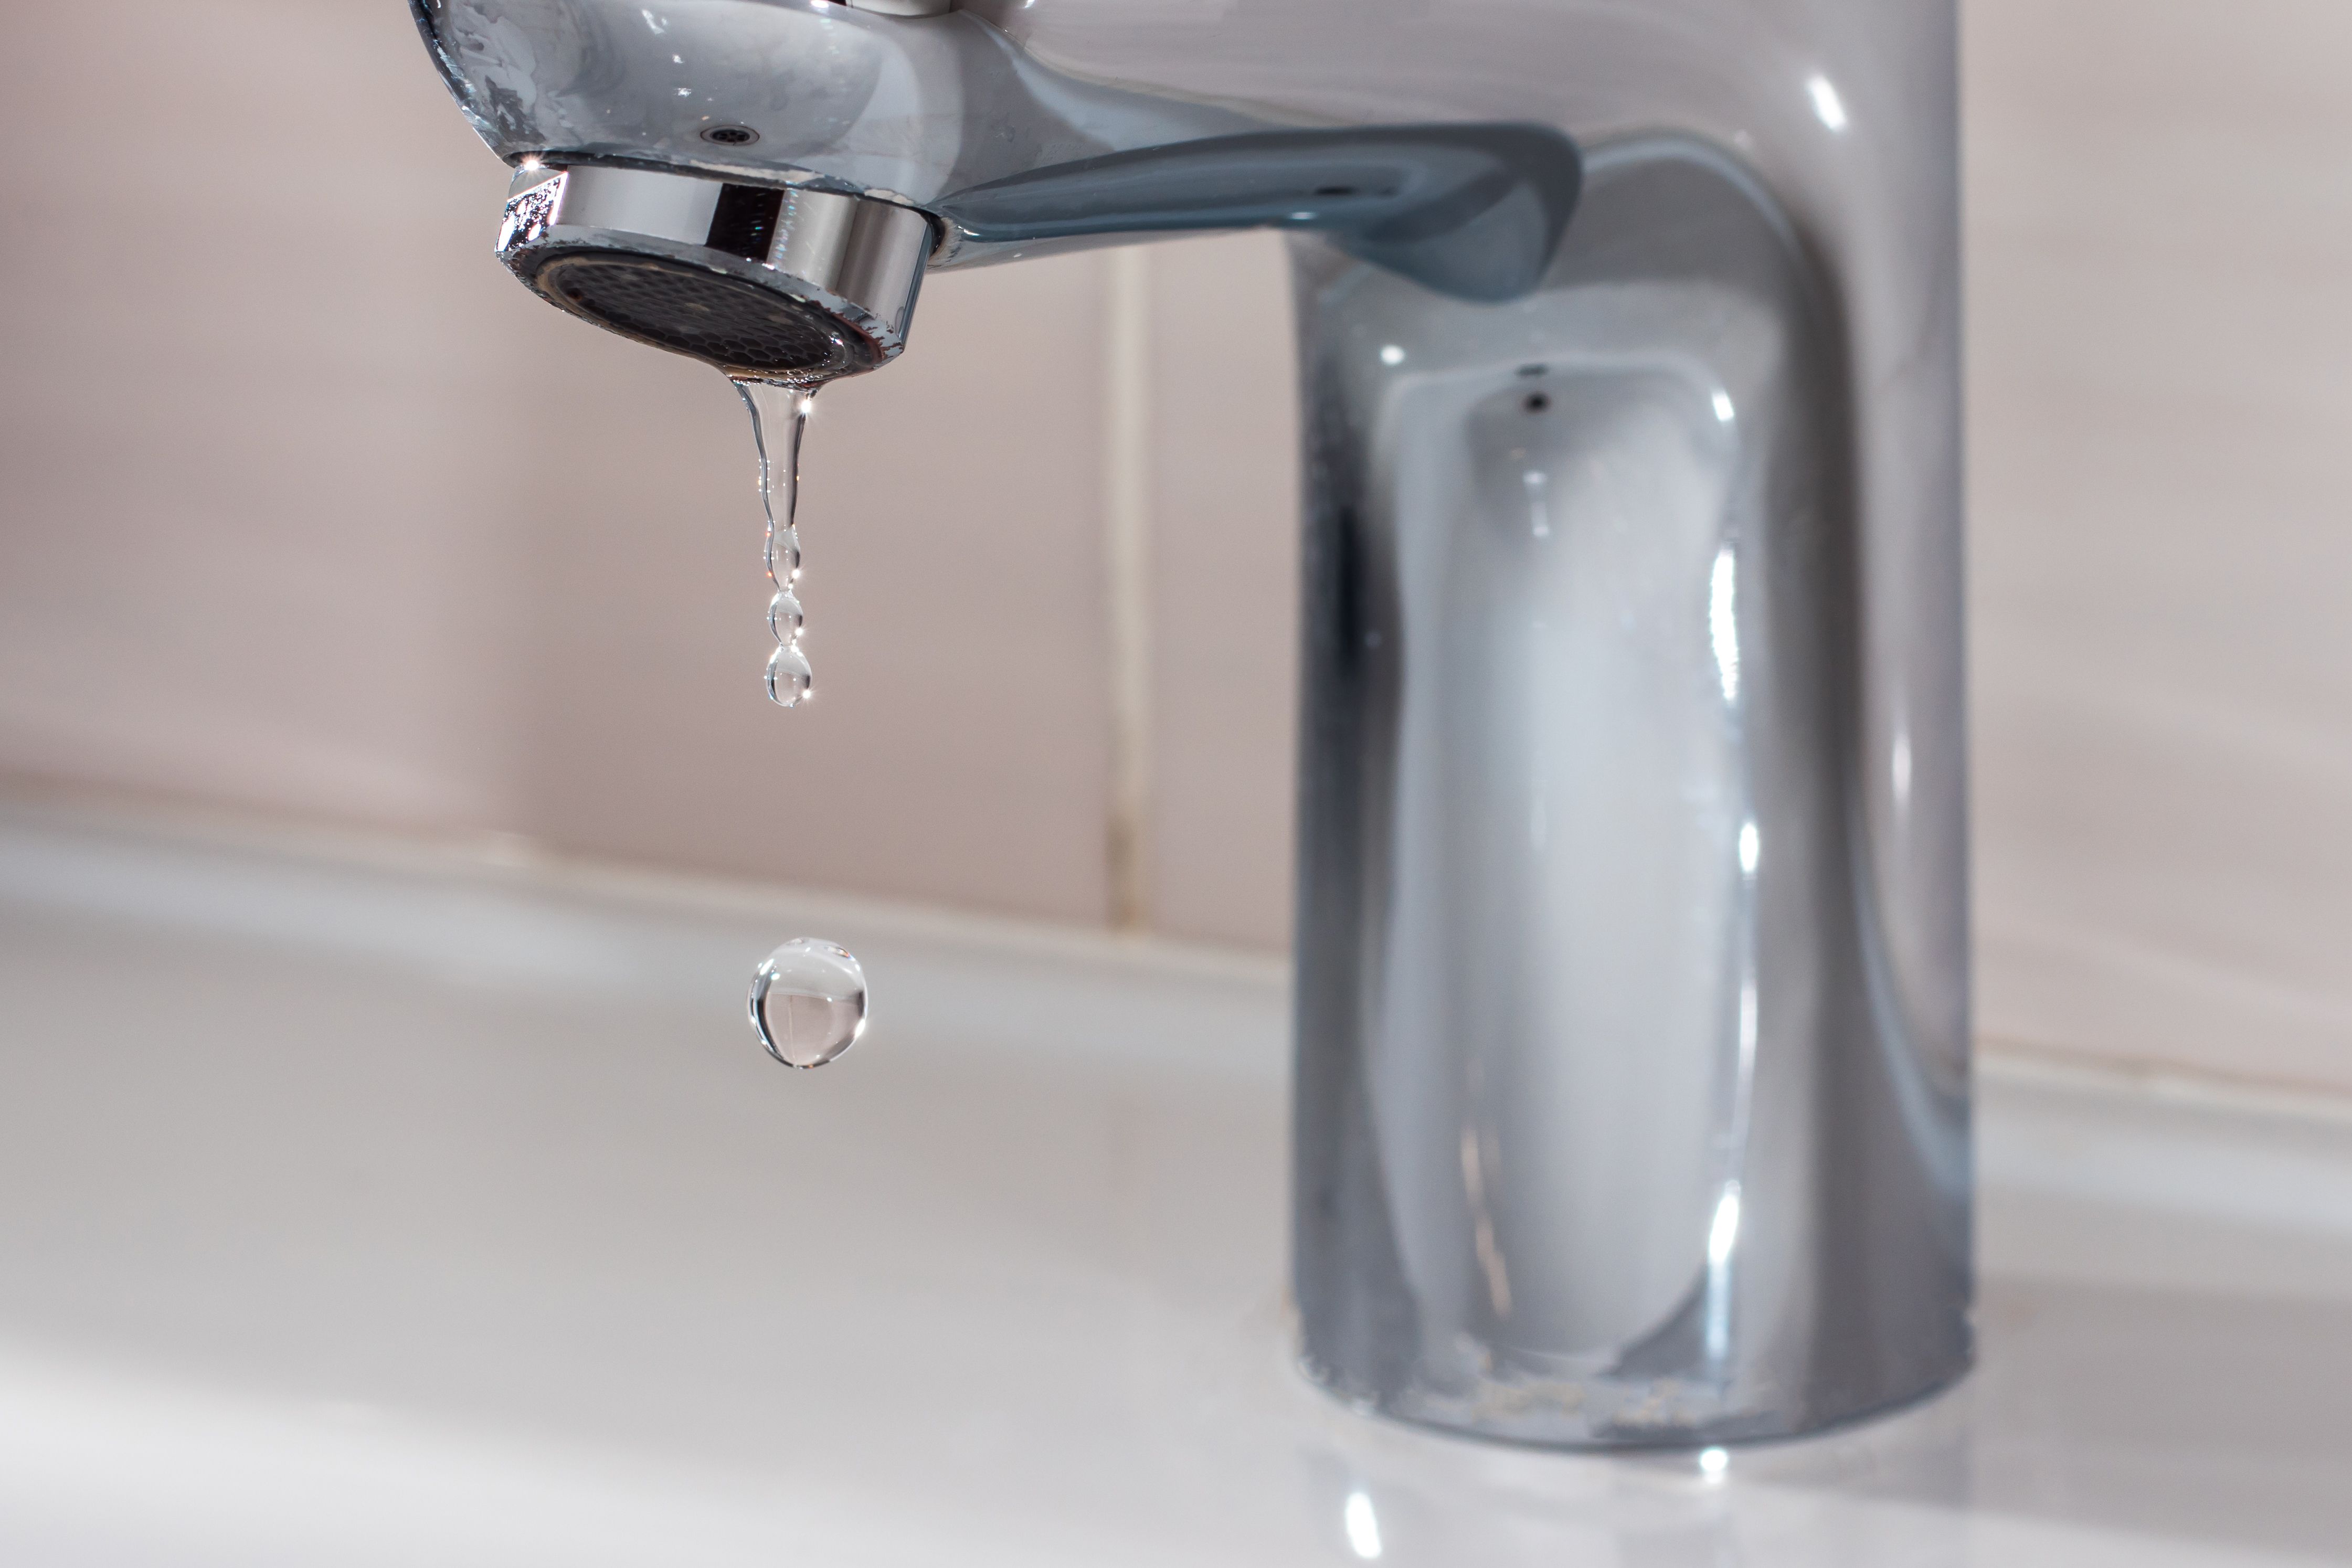 How to Fix a Leaky Faucet - 25 Easy Steps to Fix a Faucet